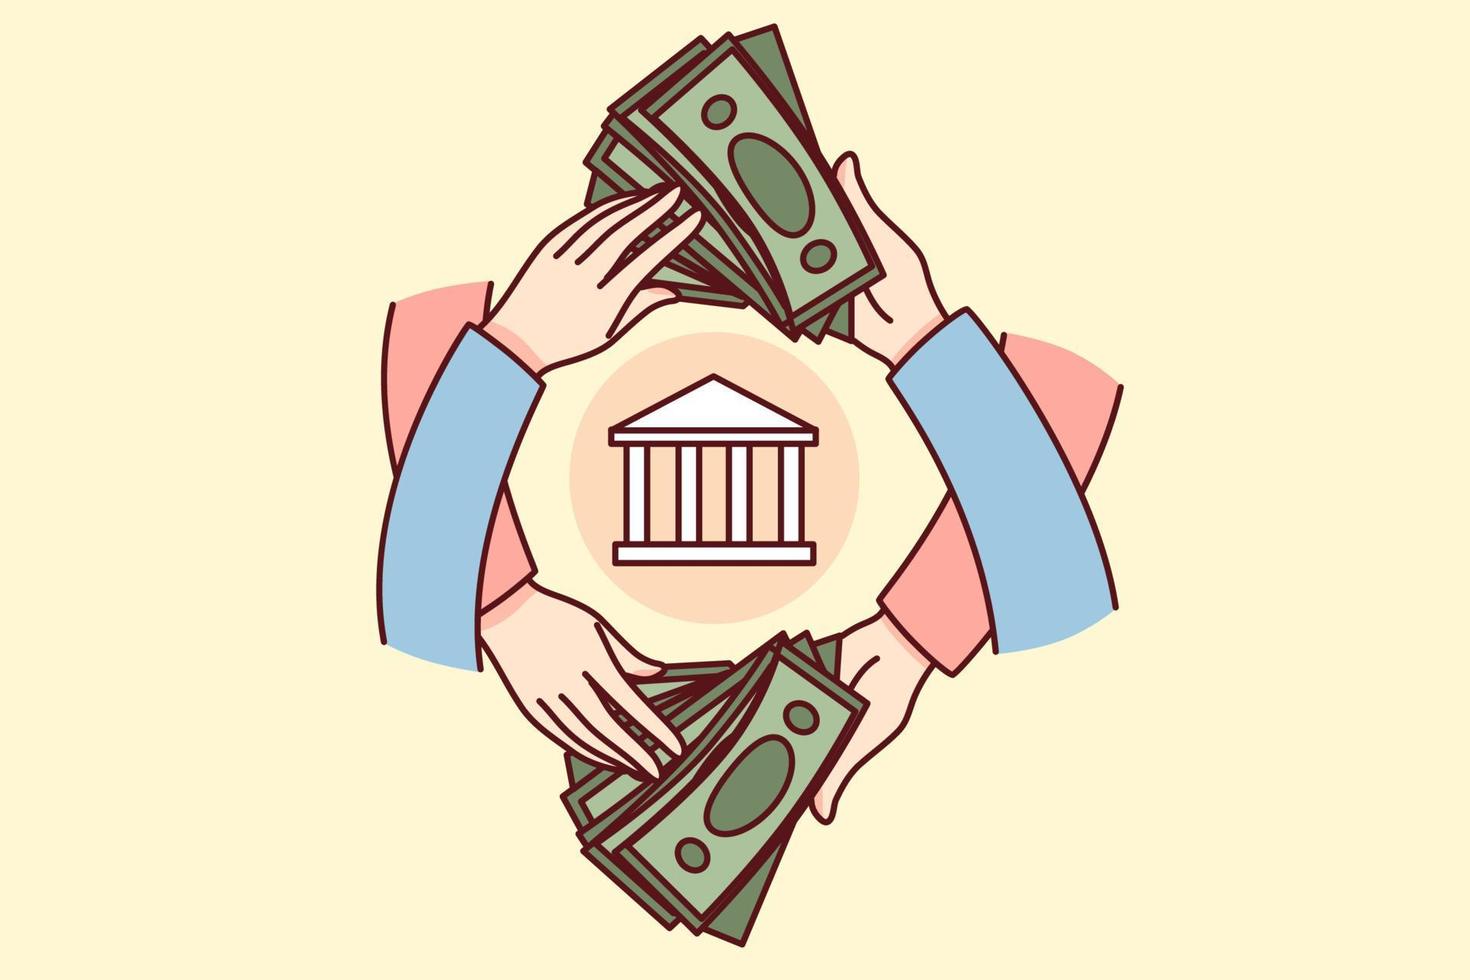 People holding dollar banknotes making financial operations through bank. Hands with money bills transfer or transaction. Economy concept. Vector illustration.